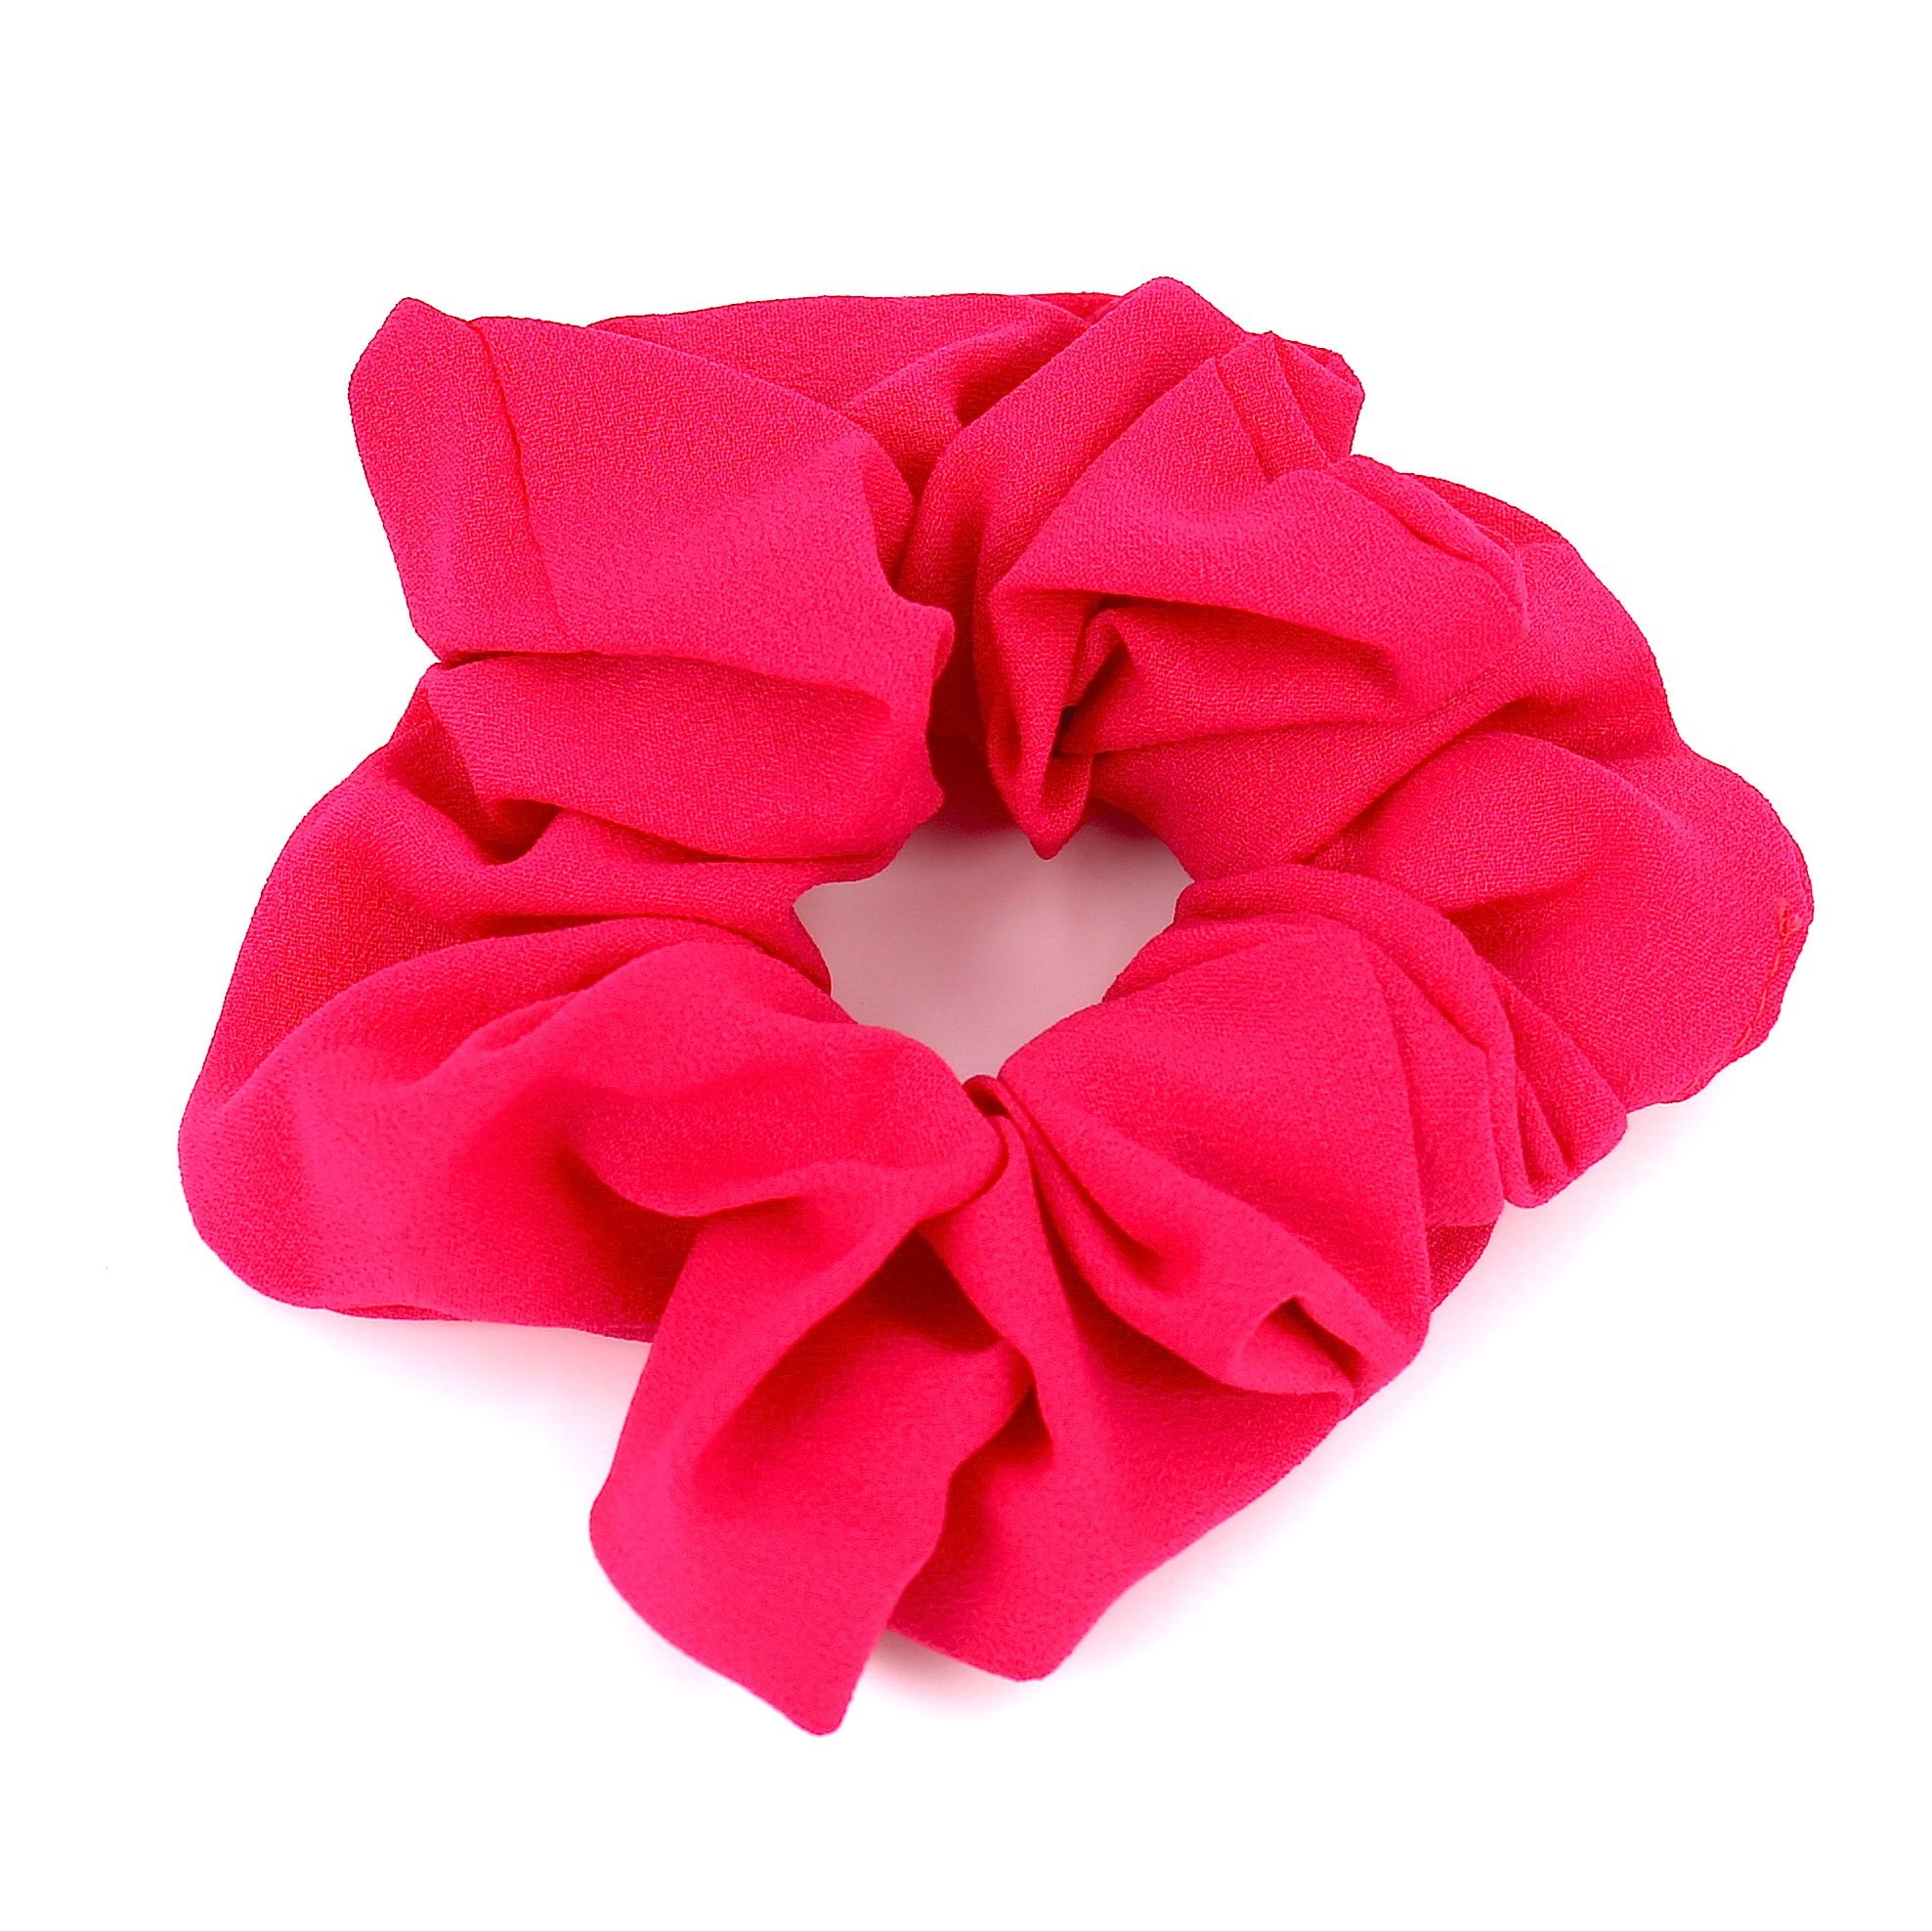 Book Cover One Piece Ladies Hair Accessories Women Girls Simple Hair Ties Scrunchy Solid Colour Premium Gifts Chiffon Hair Bands Scrunchies for Hair (Deep Pink)